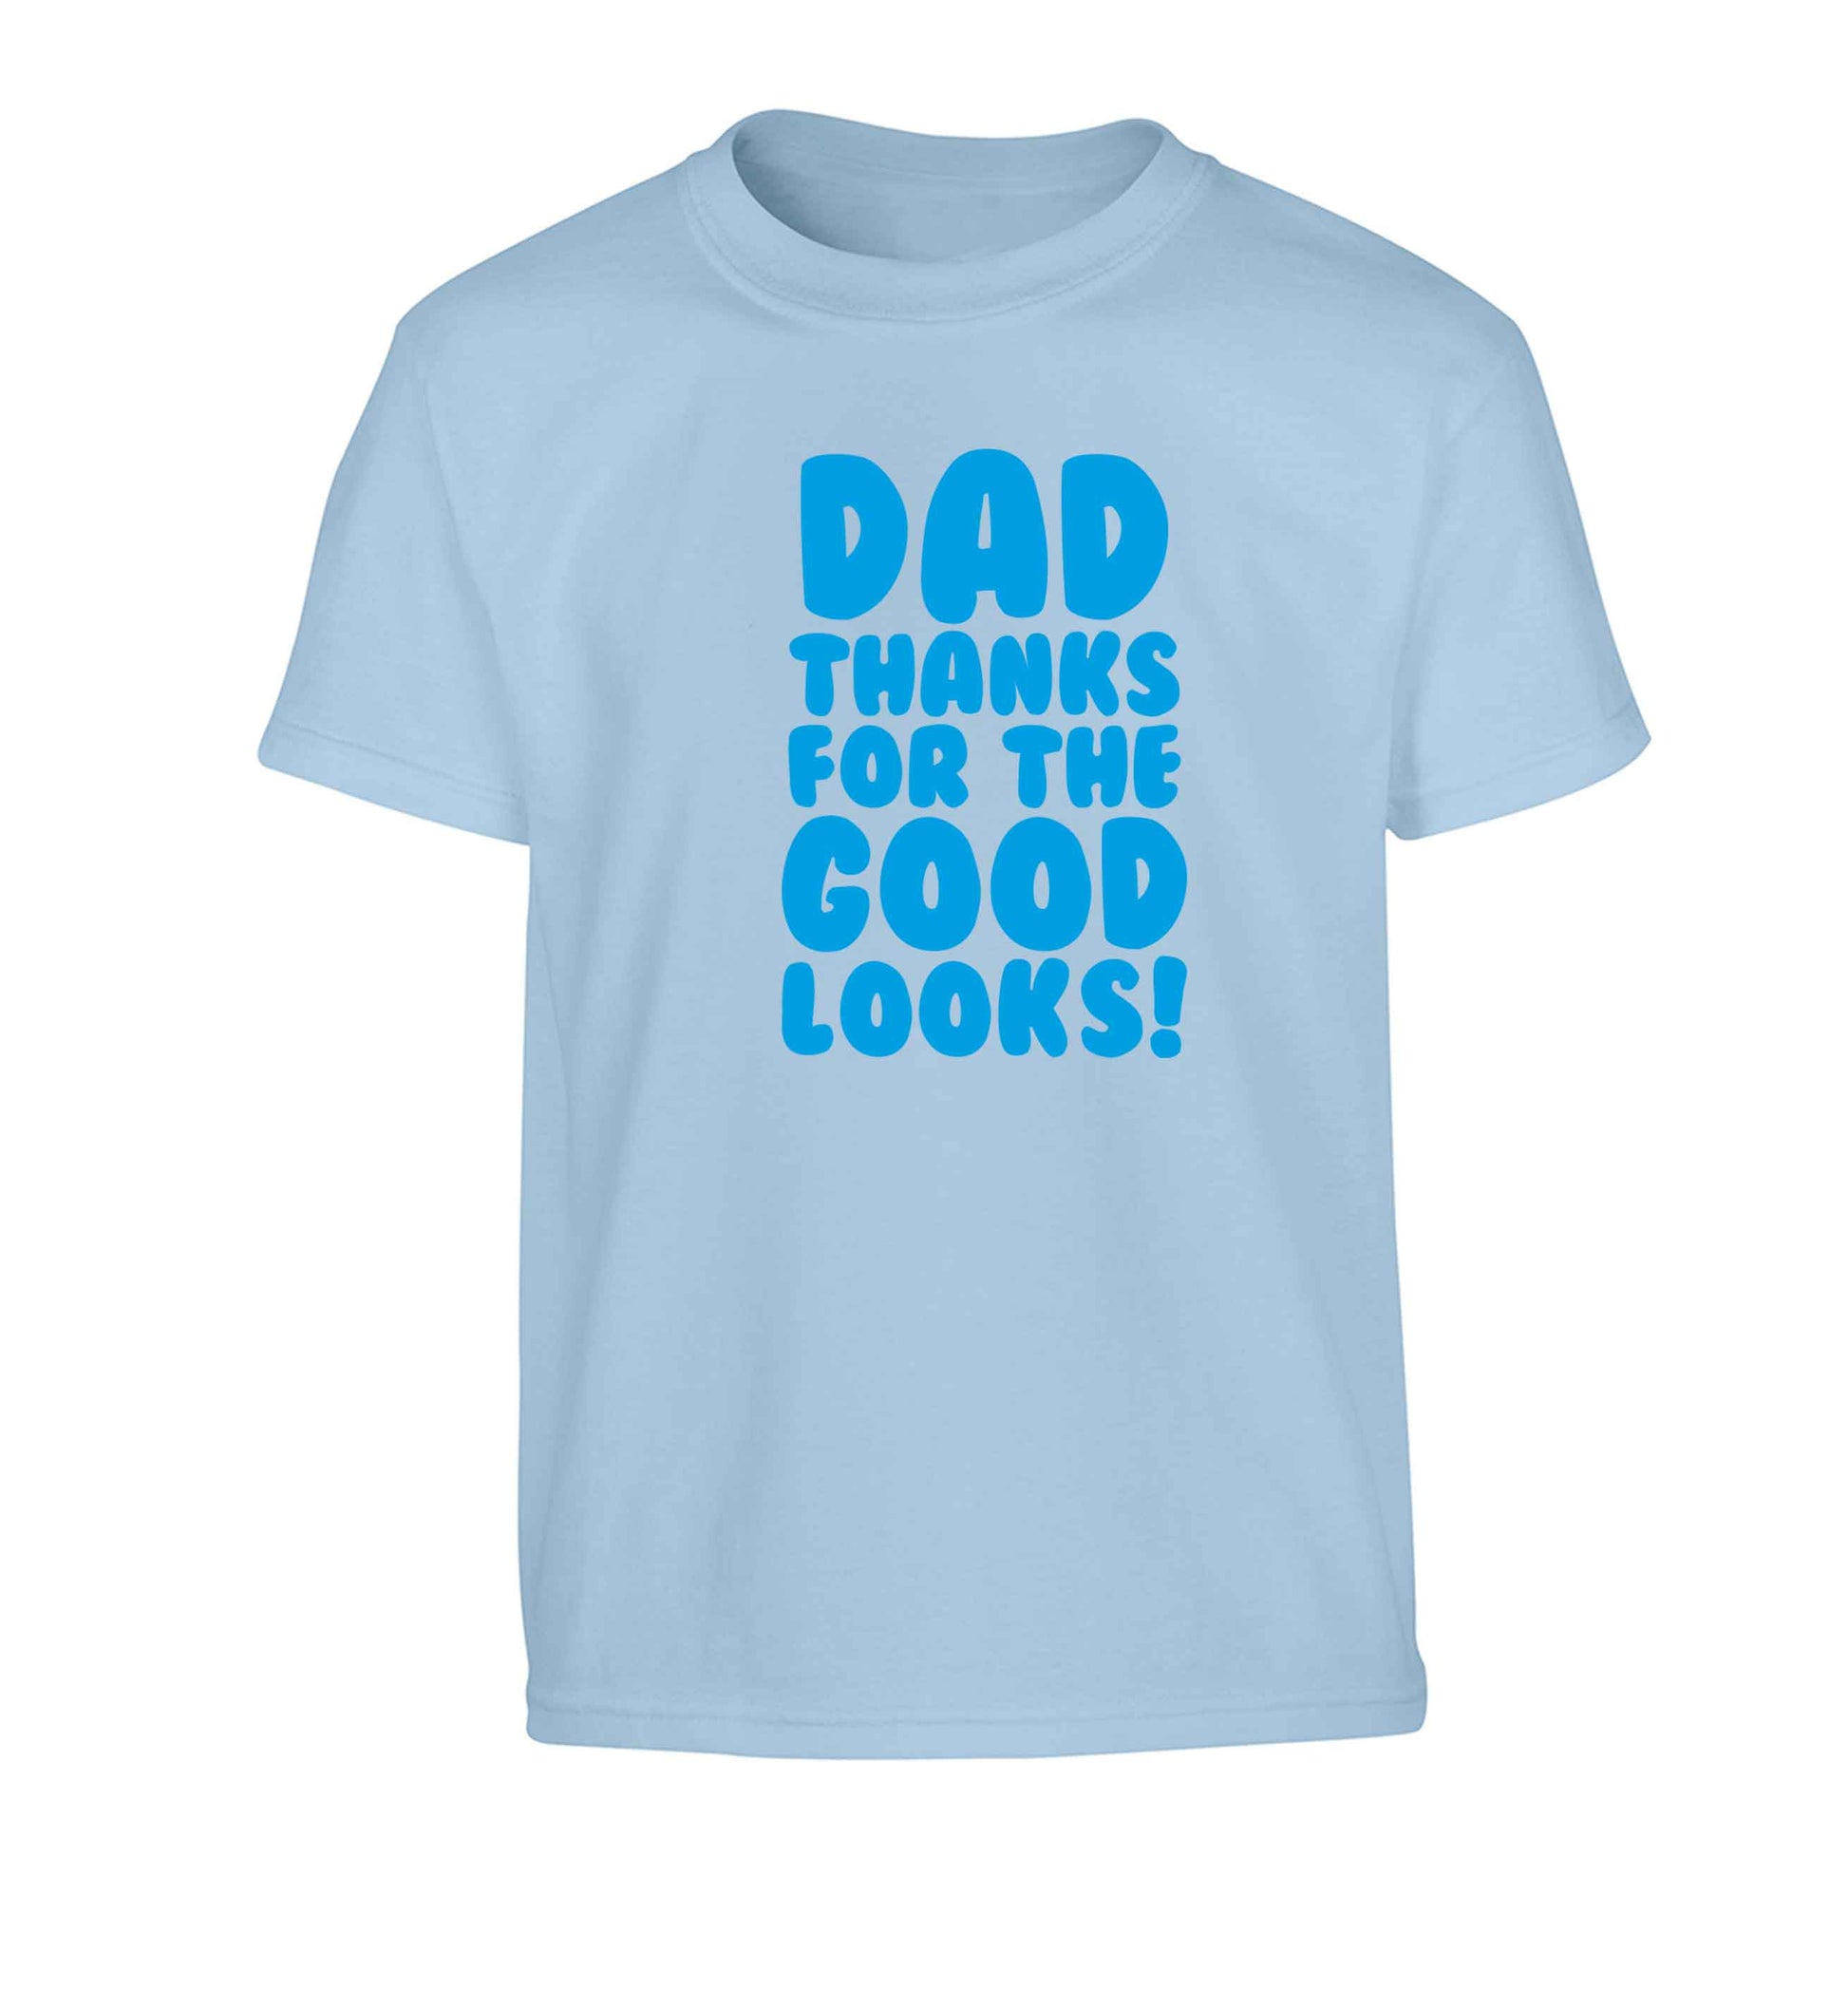 Dad thanks for the good looks Children's light blue Tshirt 12-13 Years